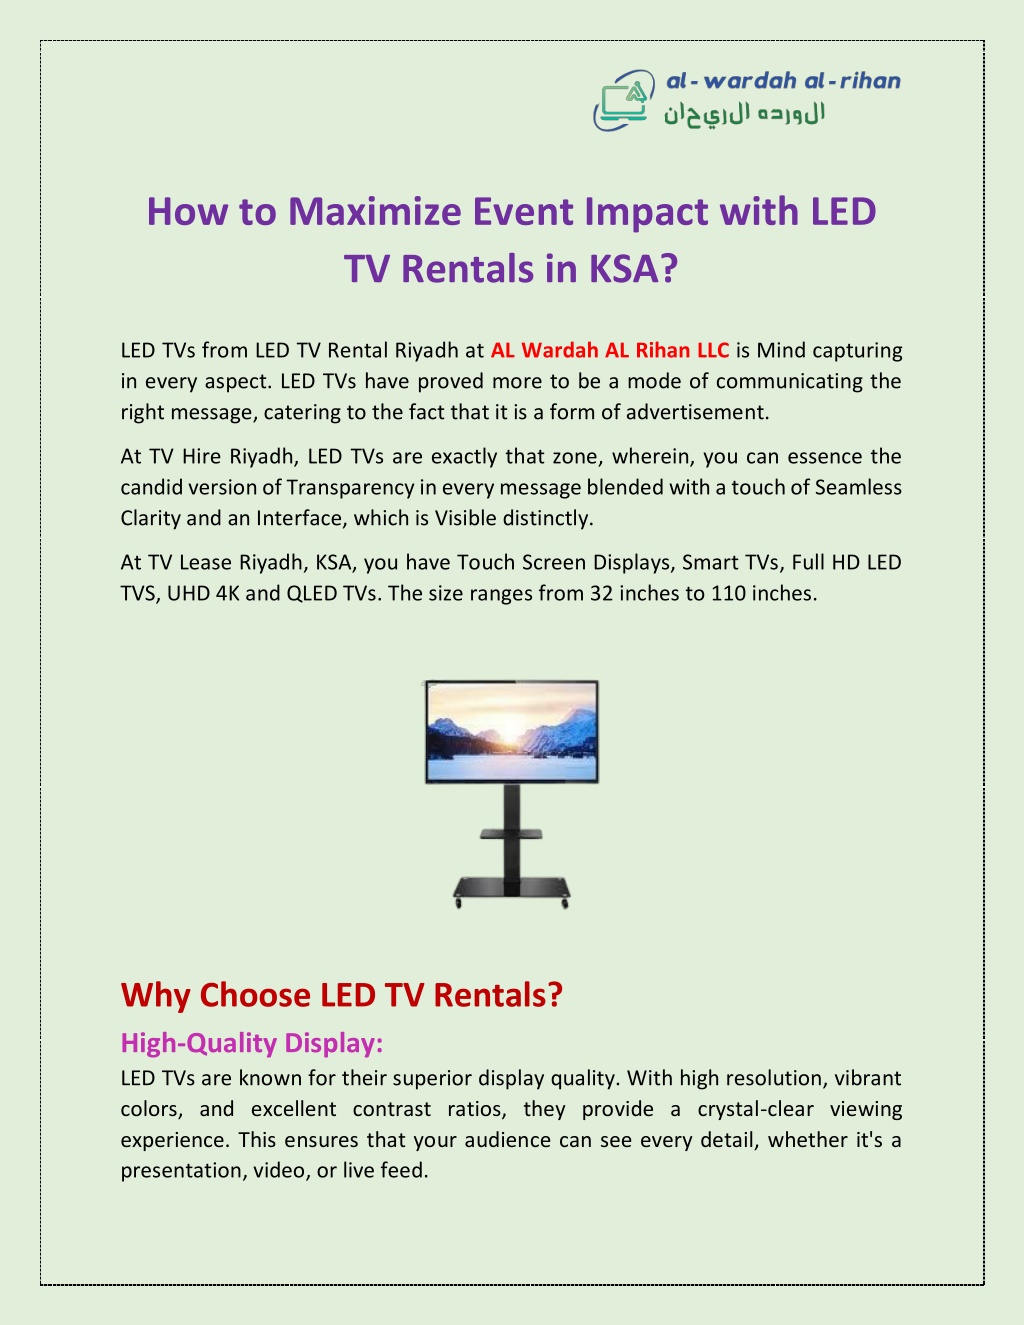 how to maximize event impact with led tv rentals l.w